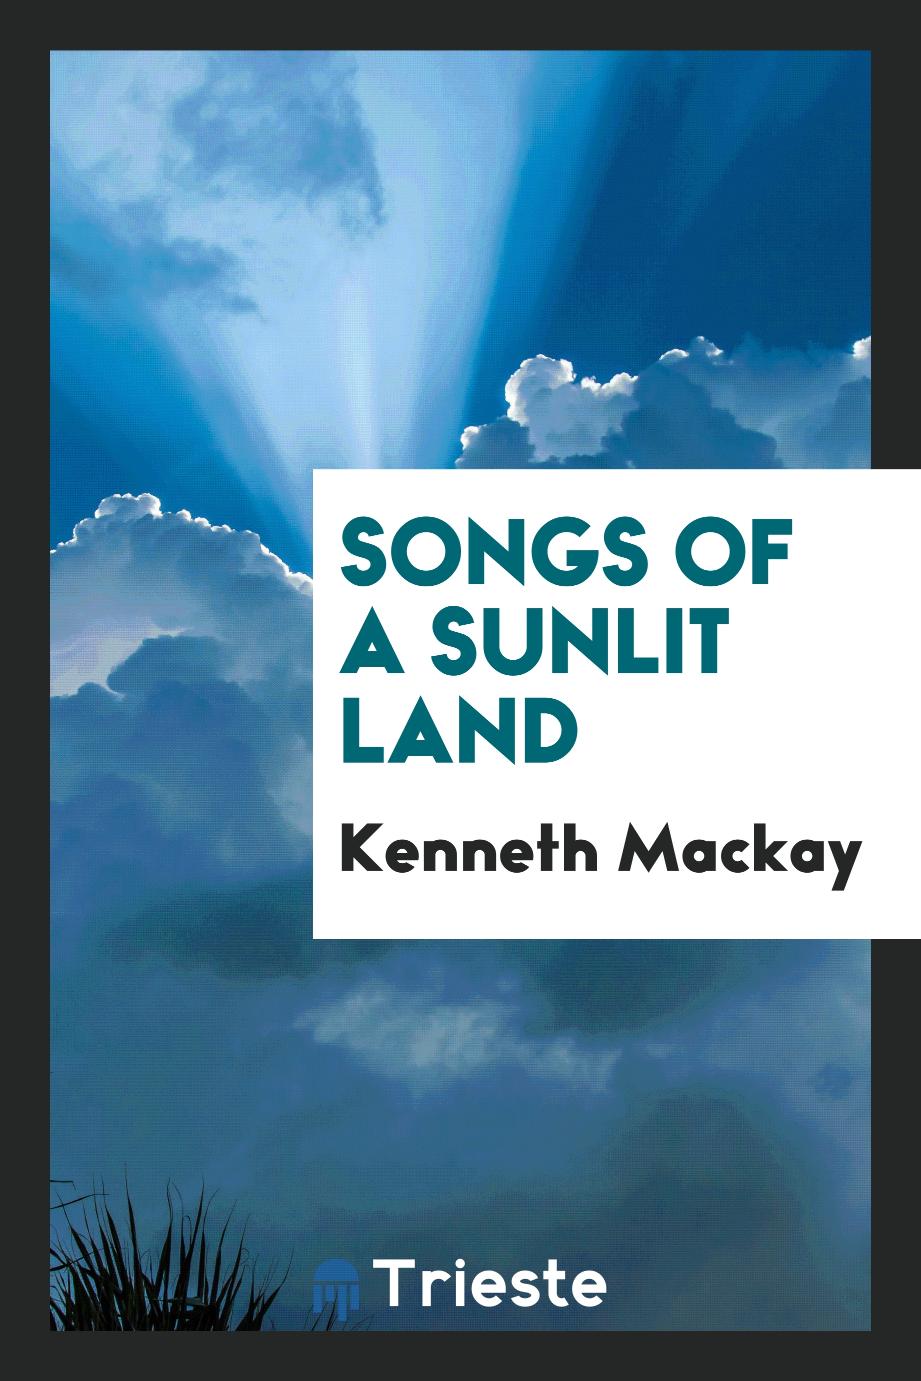 Songs of a sunlit land